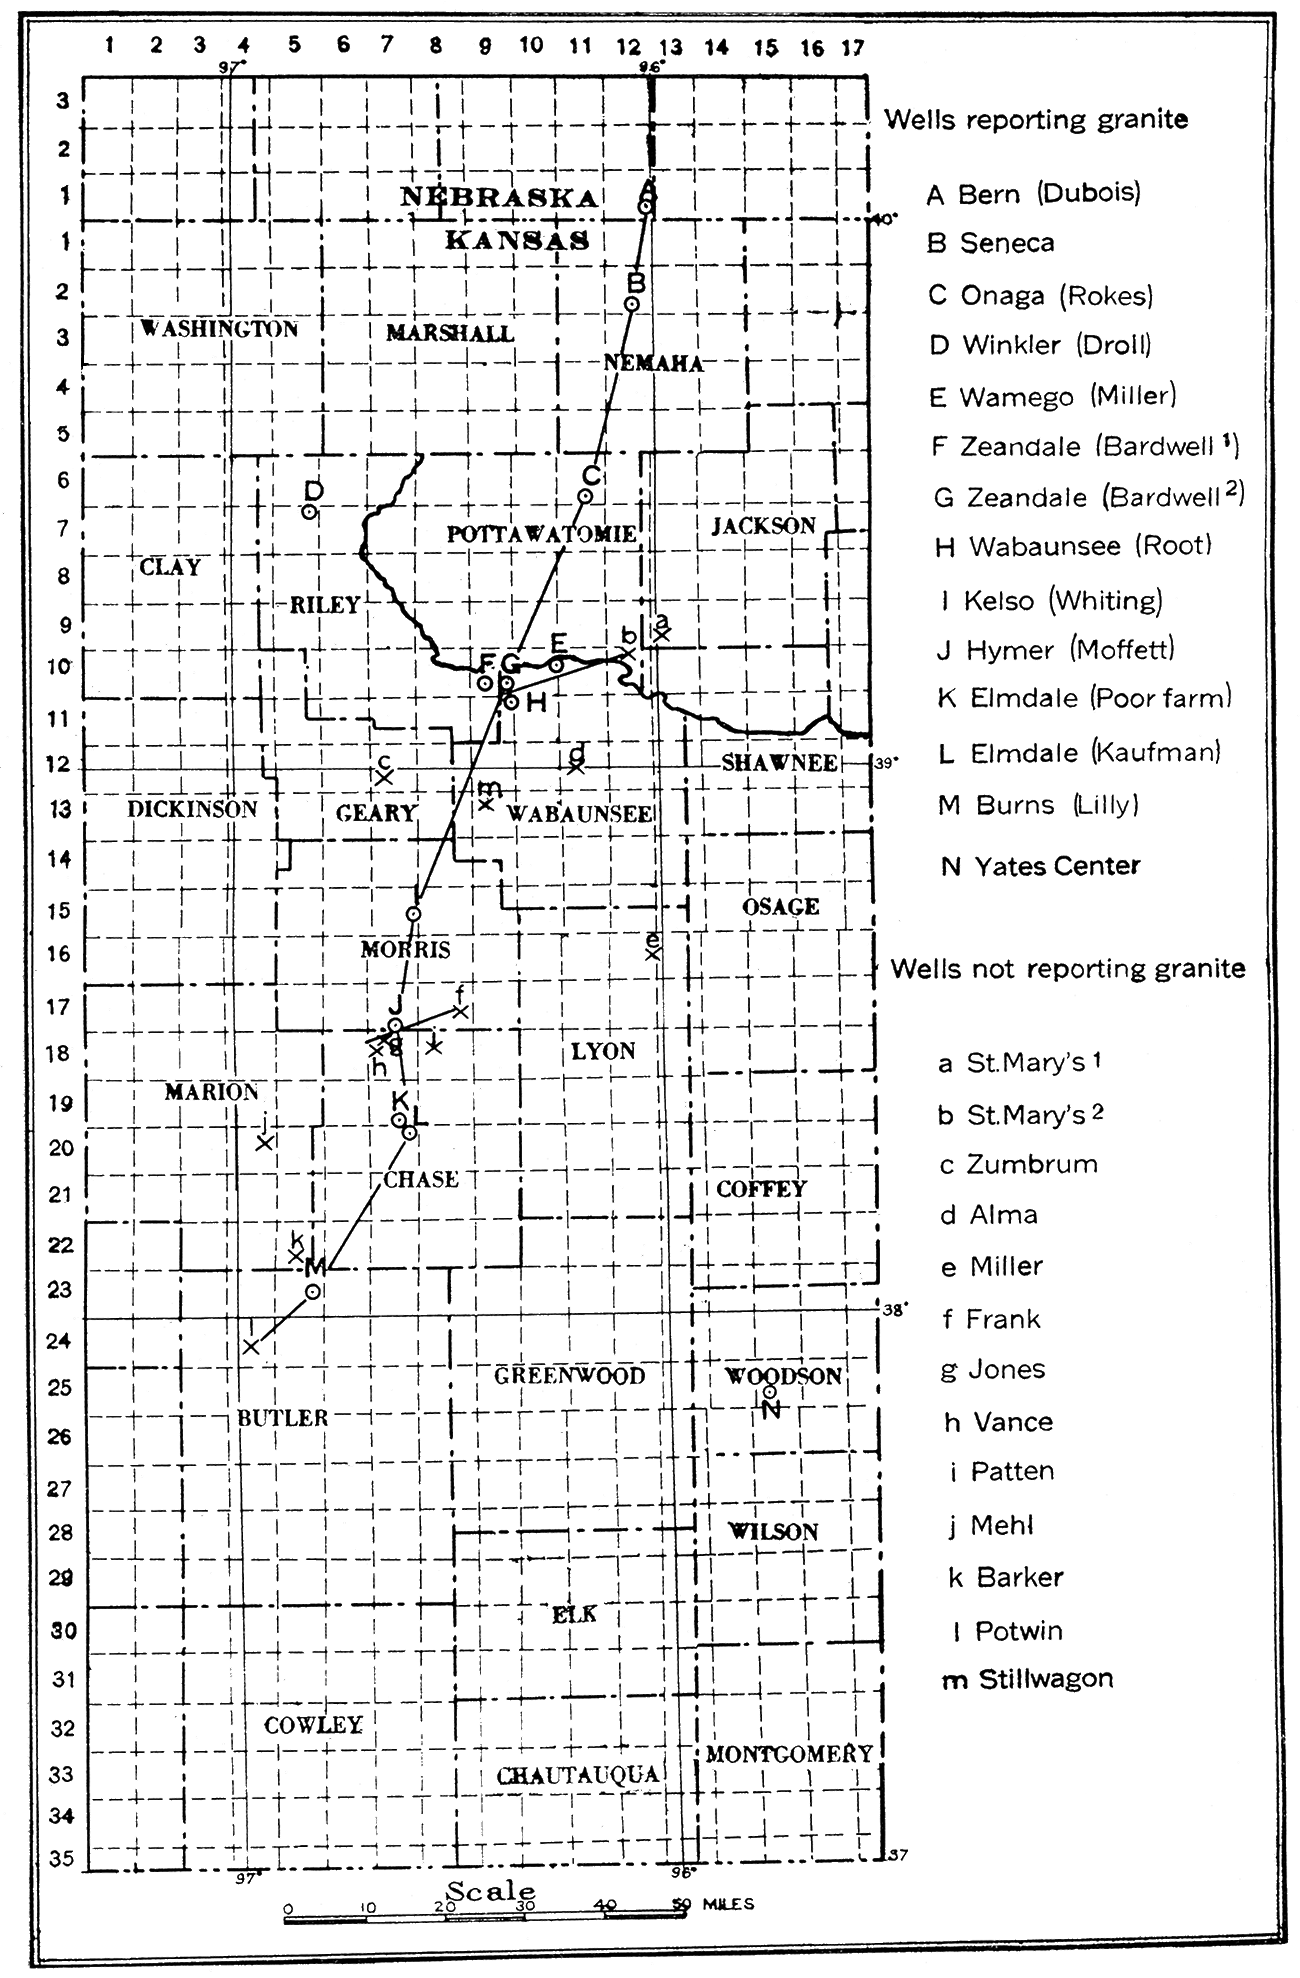 Location map of central Kansas, showing wells which have encountered granite and associated wells which have not reached granite.